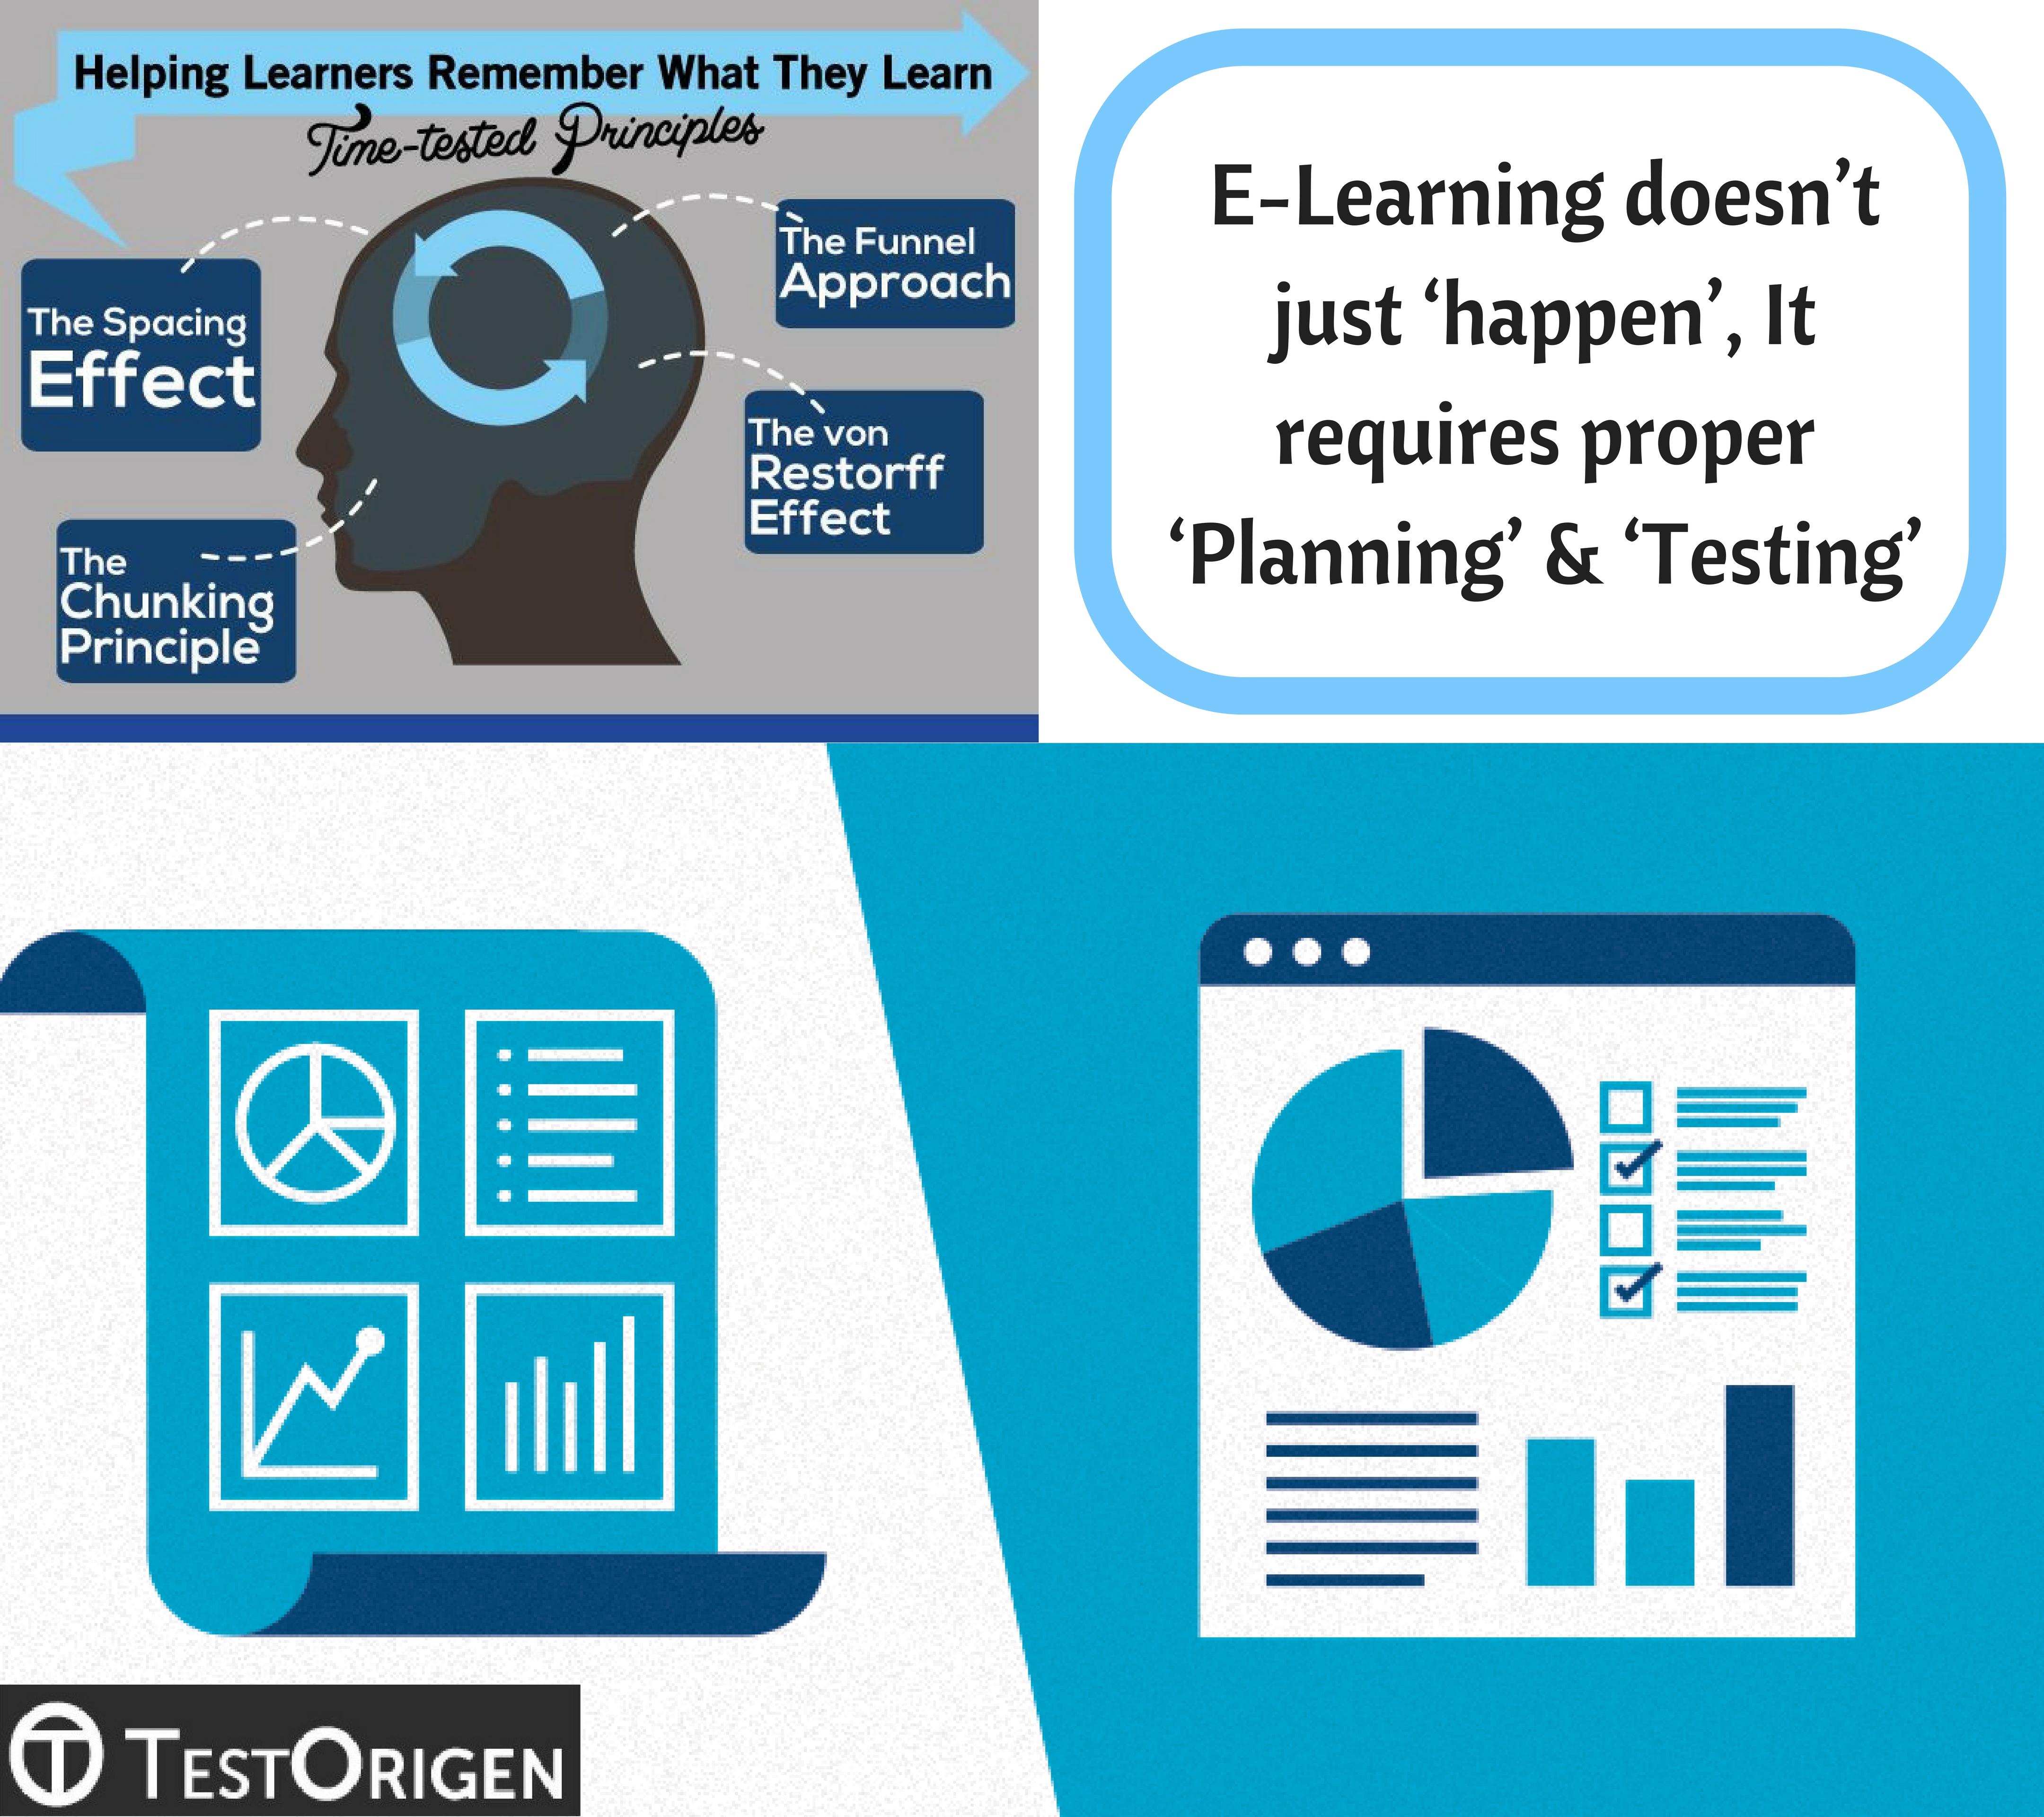 E-Learning doesn’t just ‘happen’, It requires proper ‘Planning’ & ‘Testing’